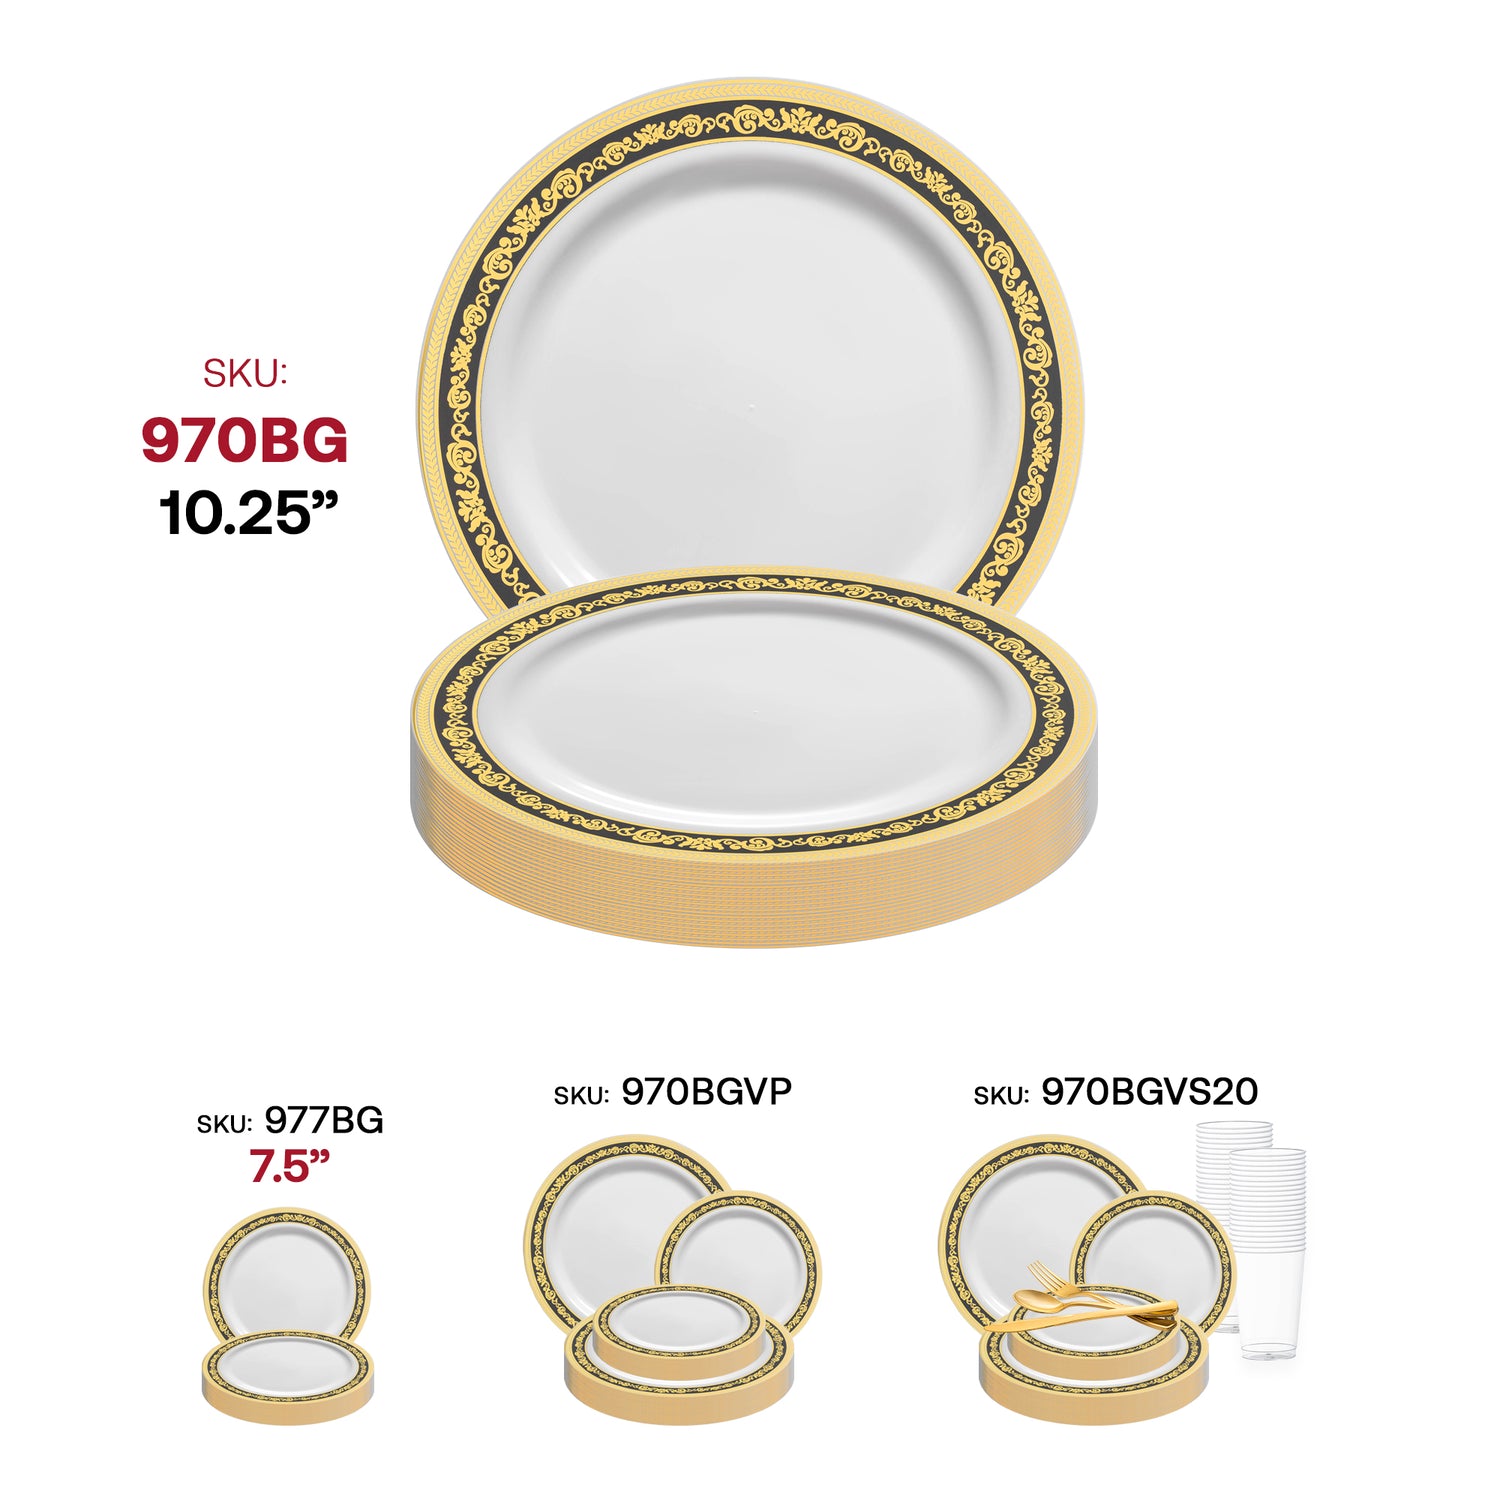 White with Black and Gold Royal Rim Plastic Dinner Plates (10.25") SKU | The Kaya Collection